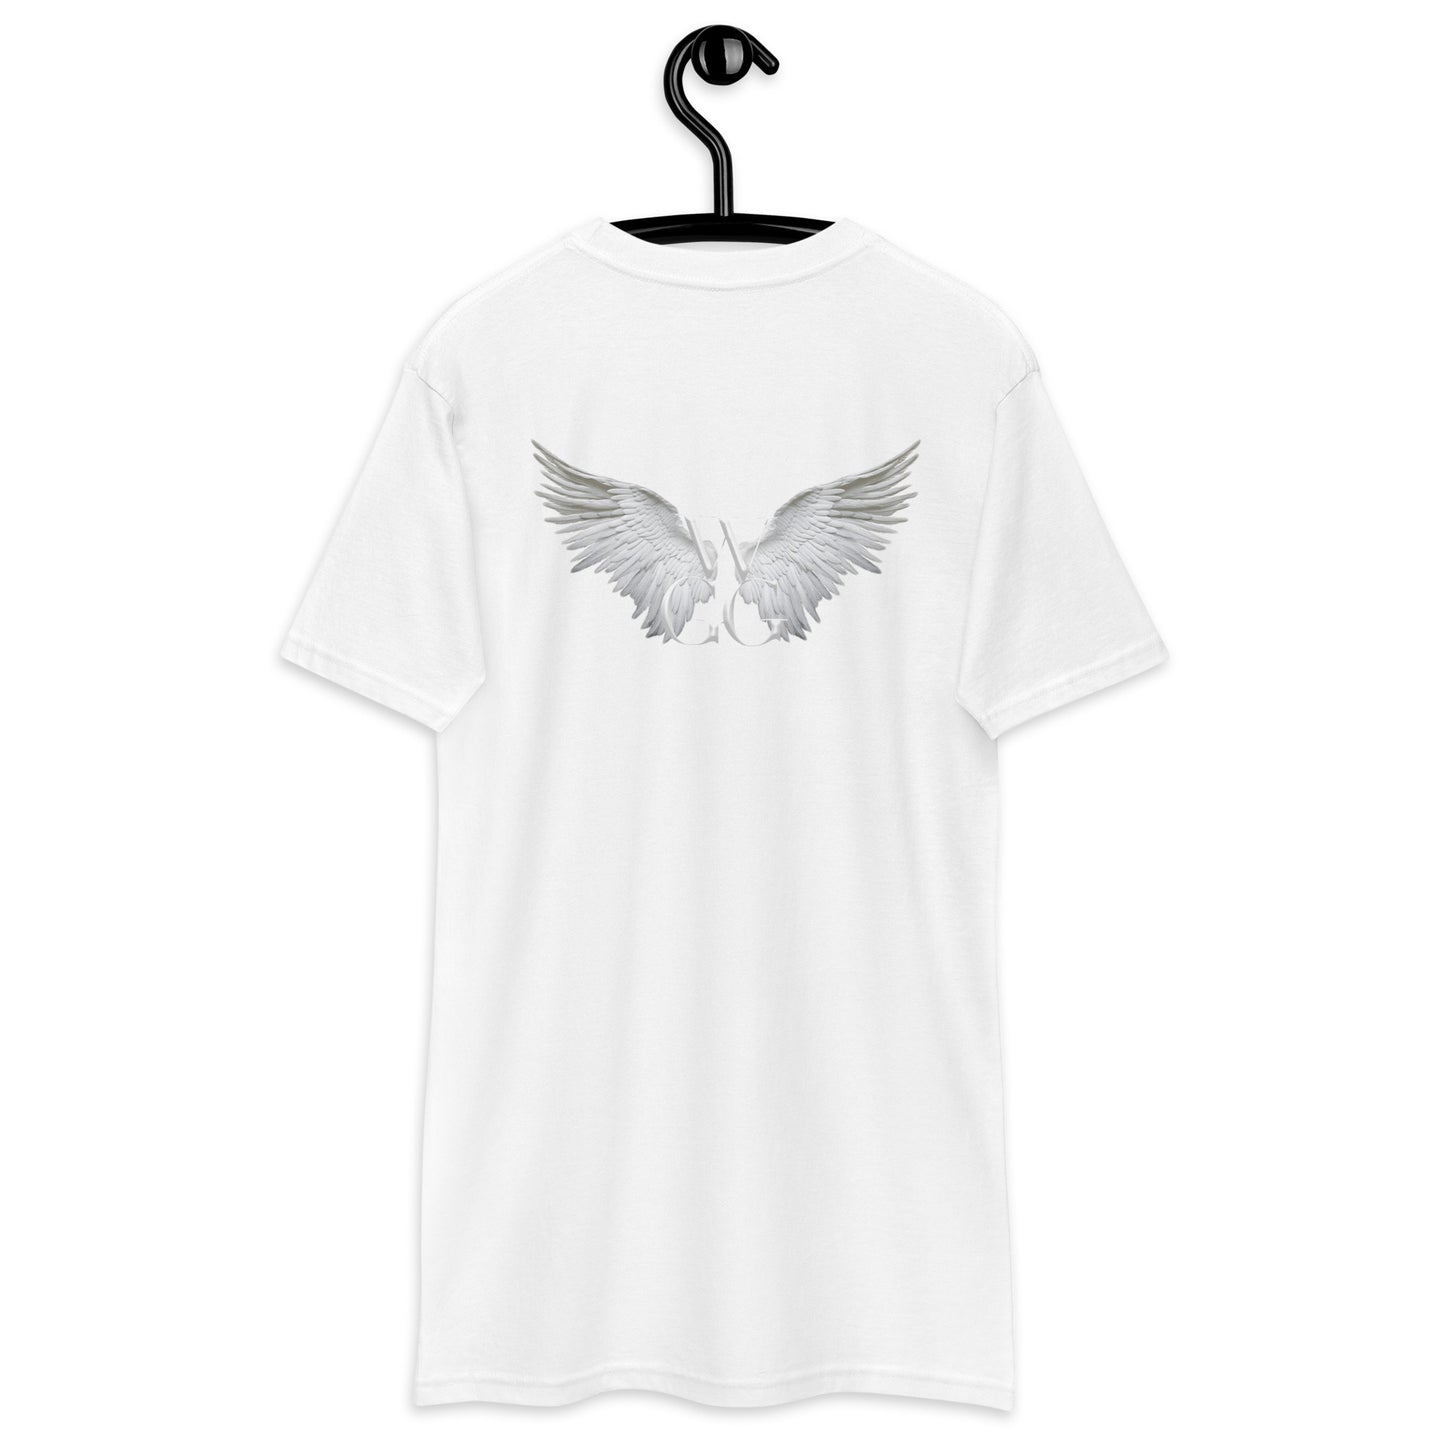 The Angels T